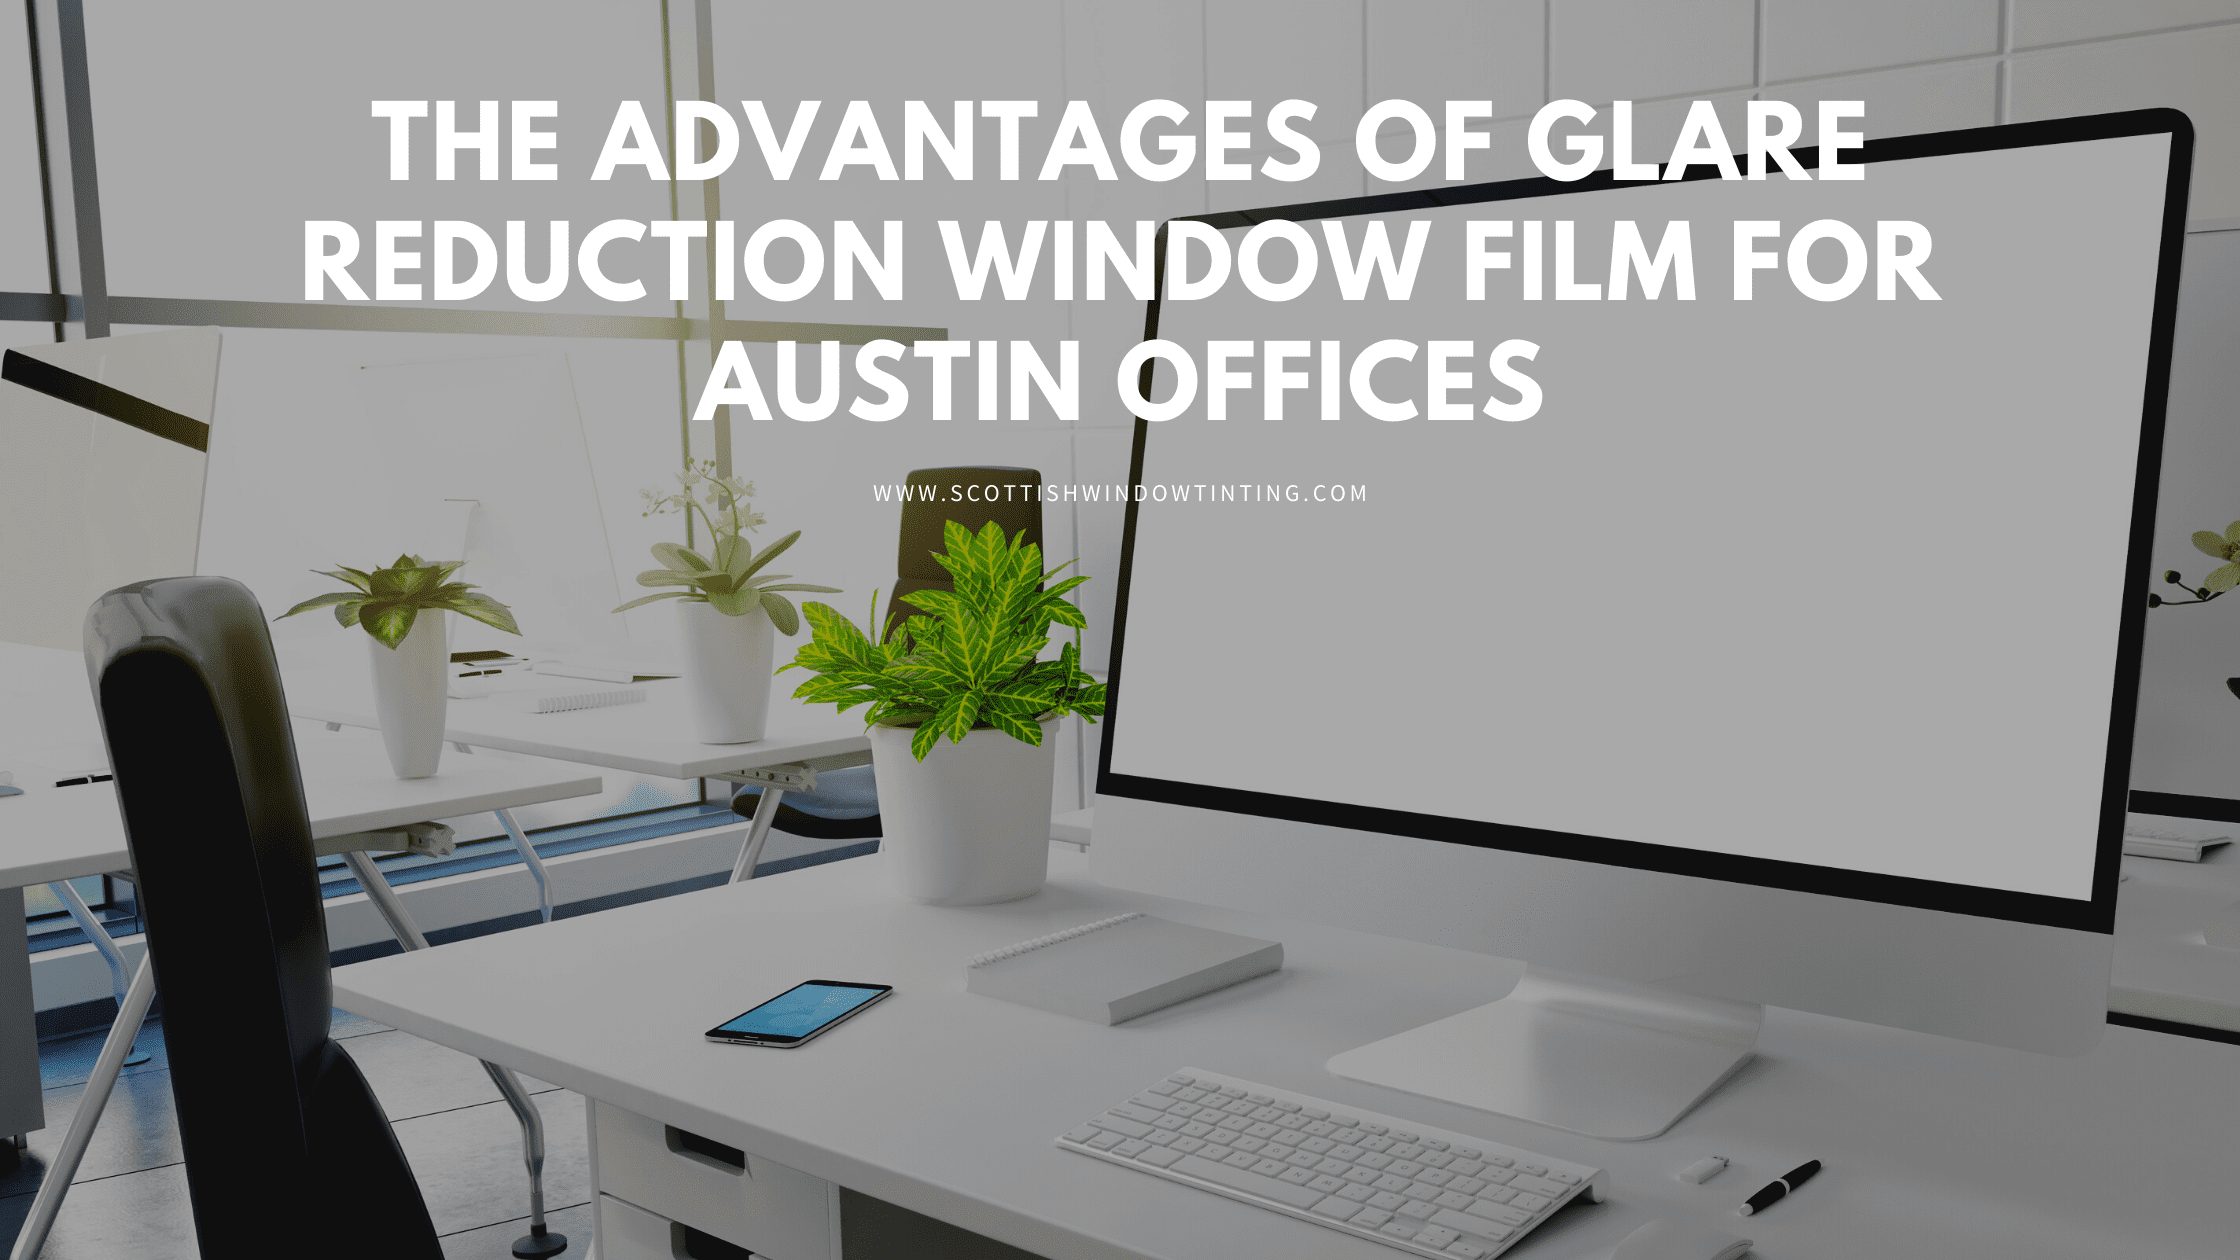 Best Reasons to Install Glare Reduction Window Film in Austin Offices